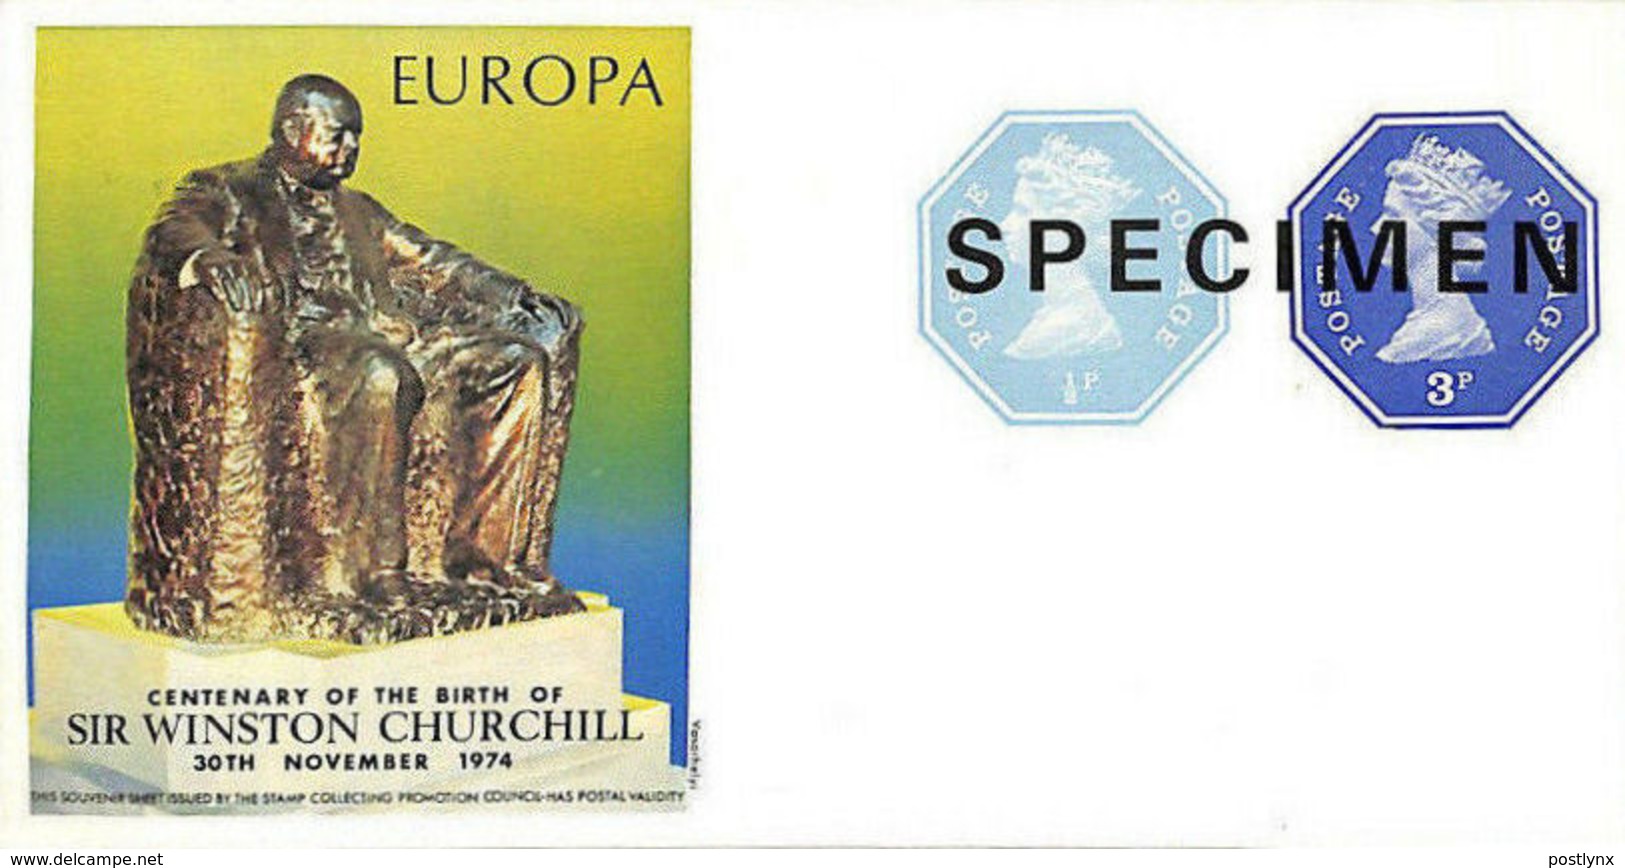 GREAT BRITAIN 1974 Monument EUROPA Churchill Machines ½p+3p SPECIMEN IMPERF:sheetlet - Imperforated